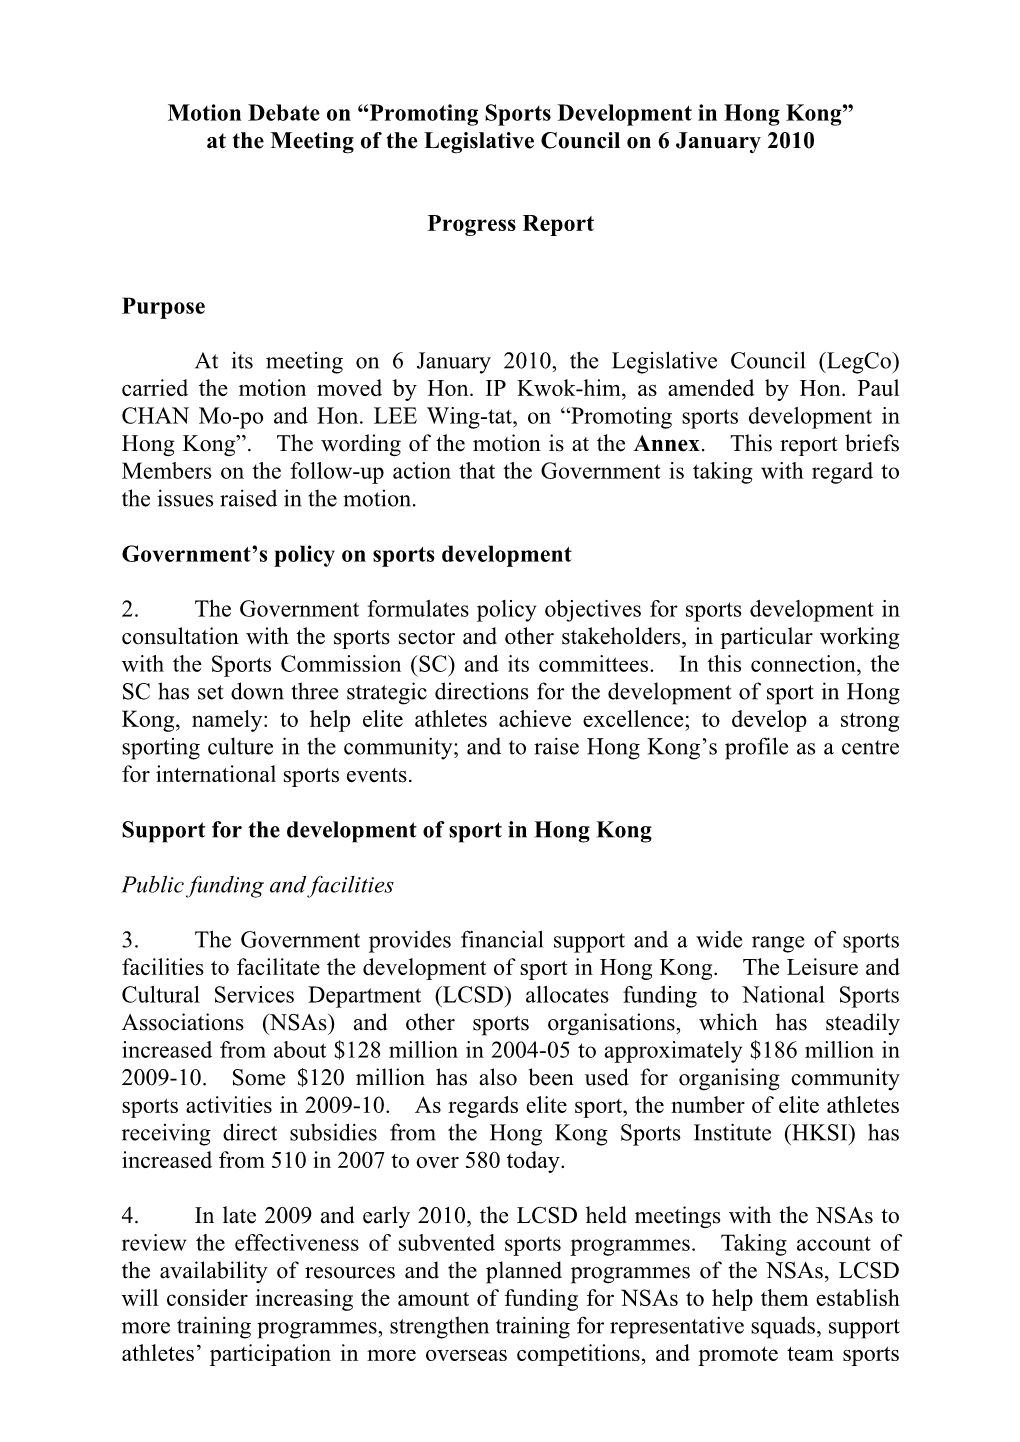 Motion Debate on “Promoting Sports Development in Hong Kong” at the Meeting of the Legislative Council on 6 January 2010